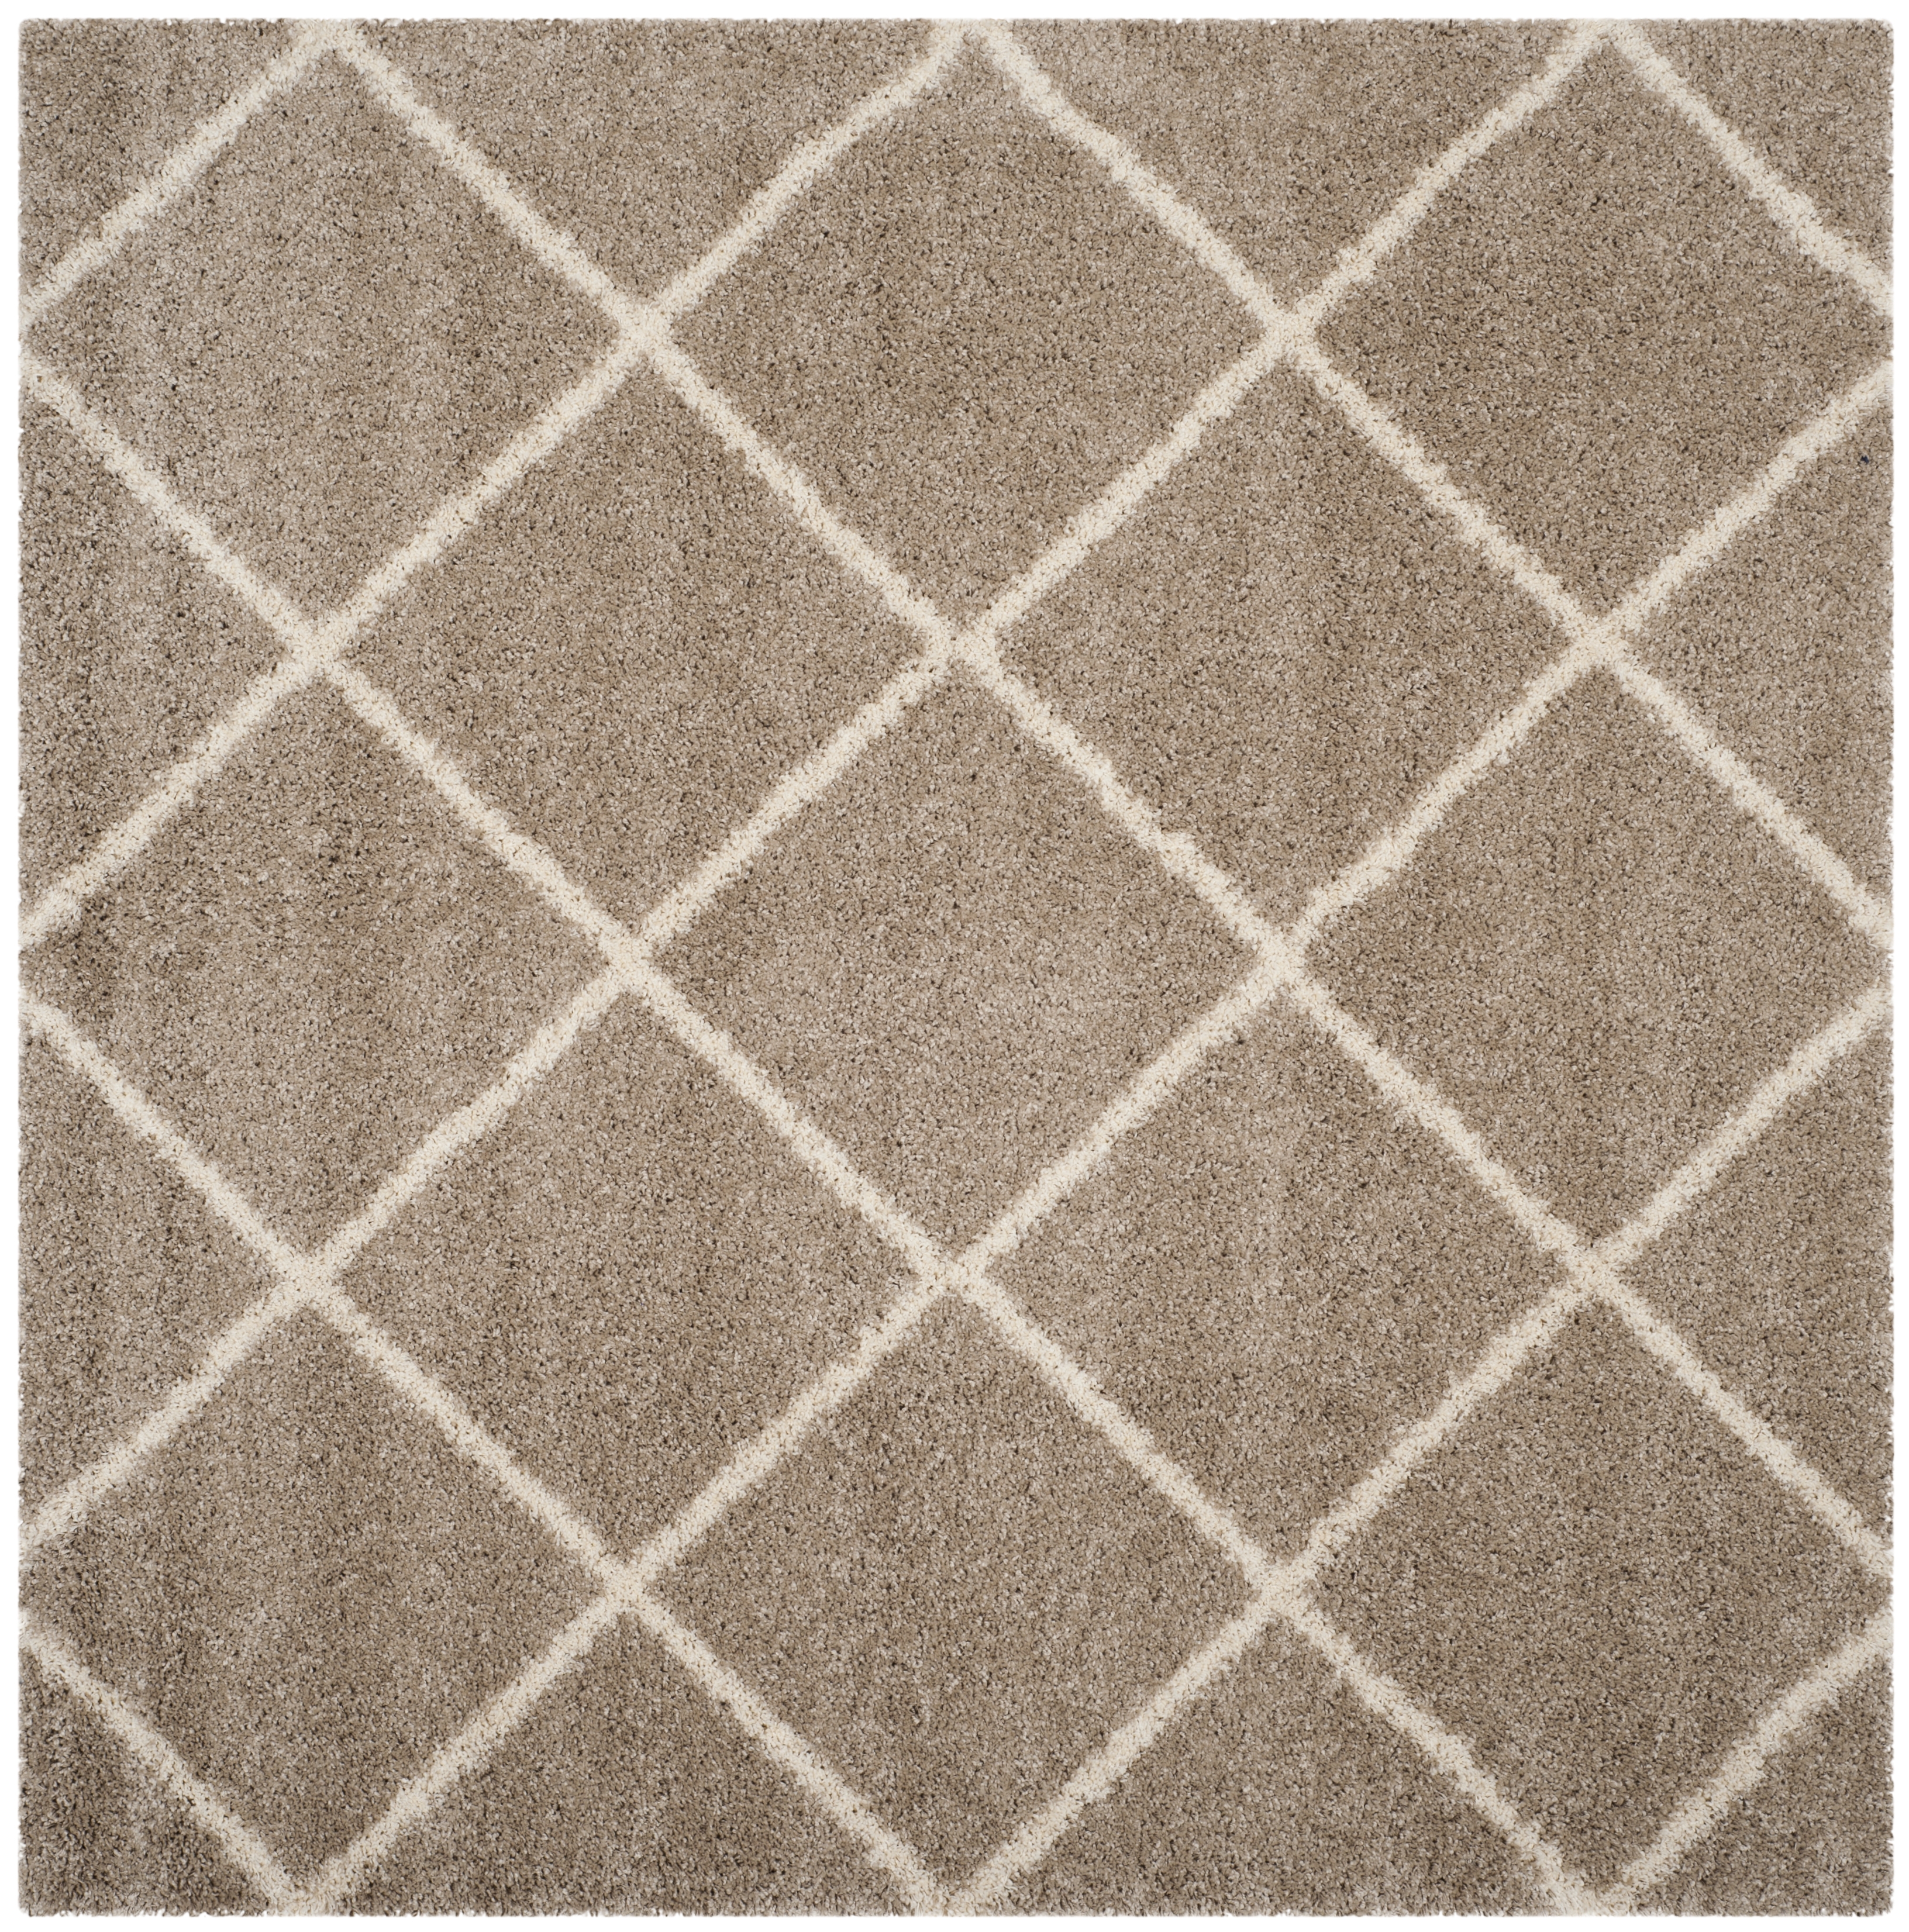 Arlo Home Woven Area Rug, SGH281S, Beige/Ivory,  7' X 7' Square - Image 0